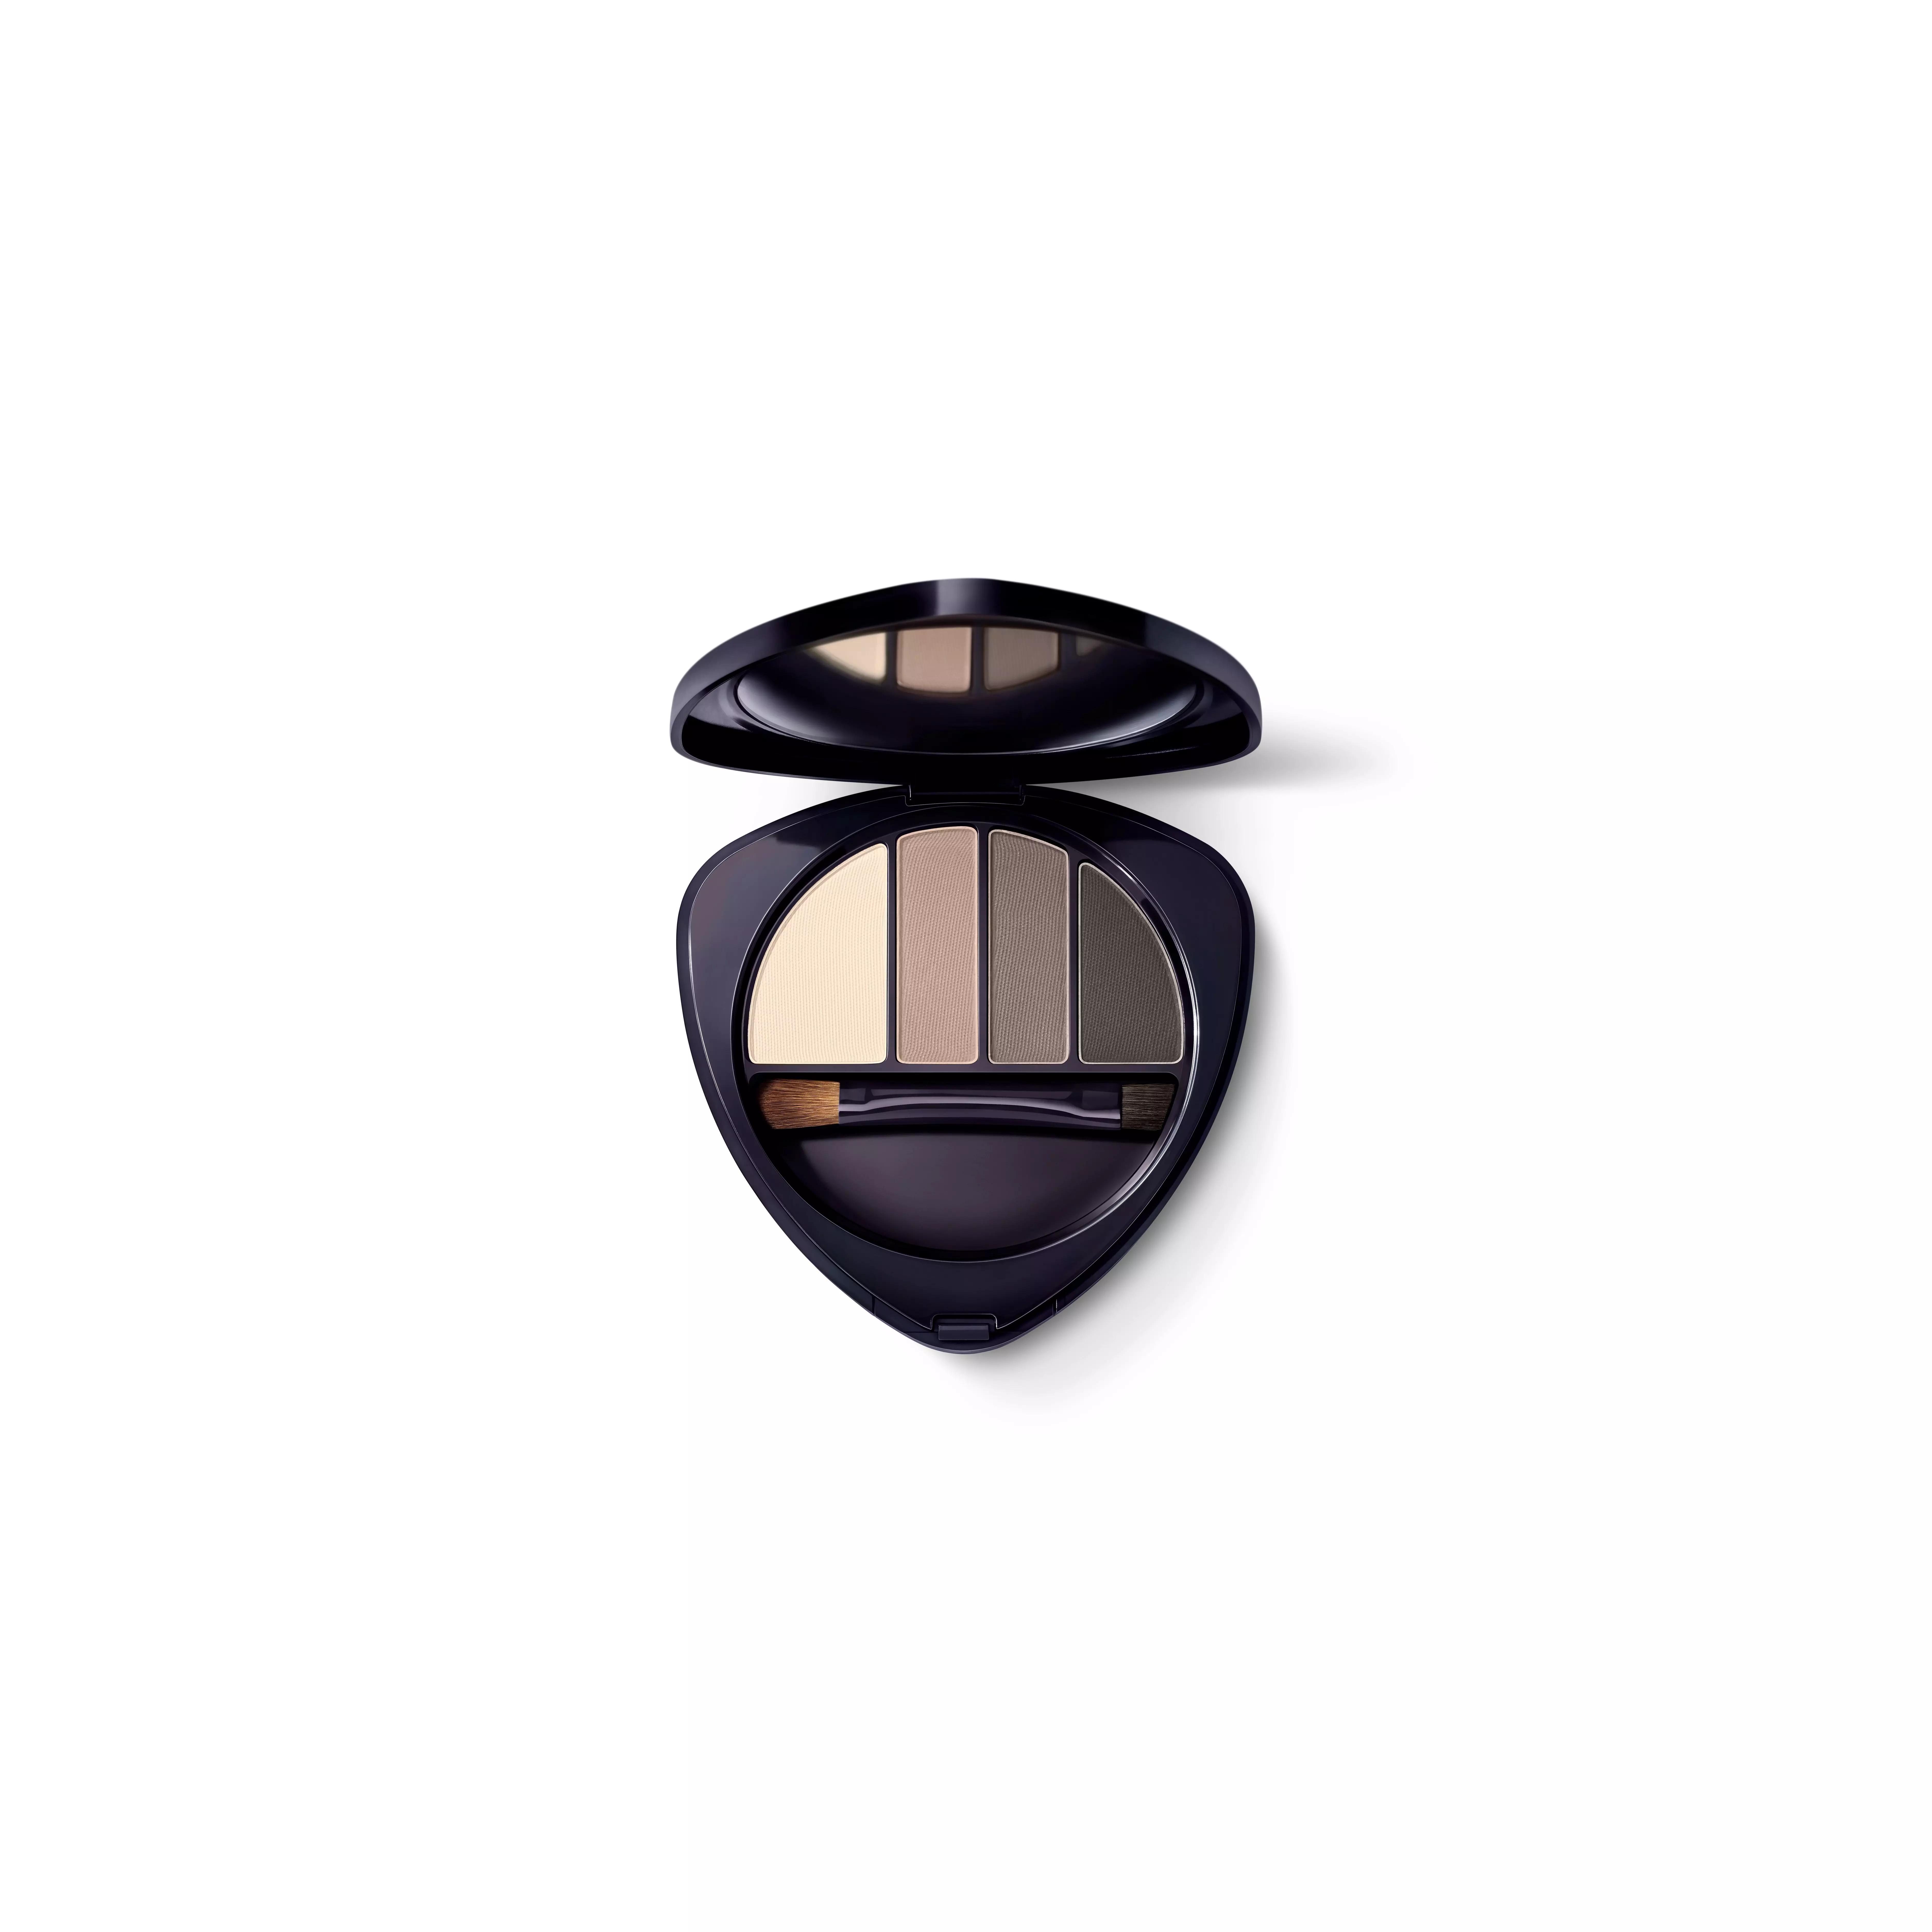 Dr. Hauschka Eye And Brow Palette